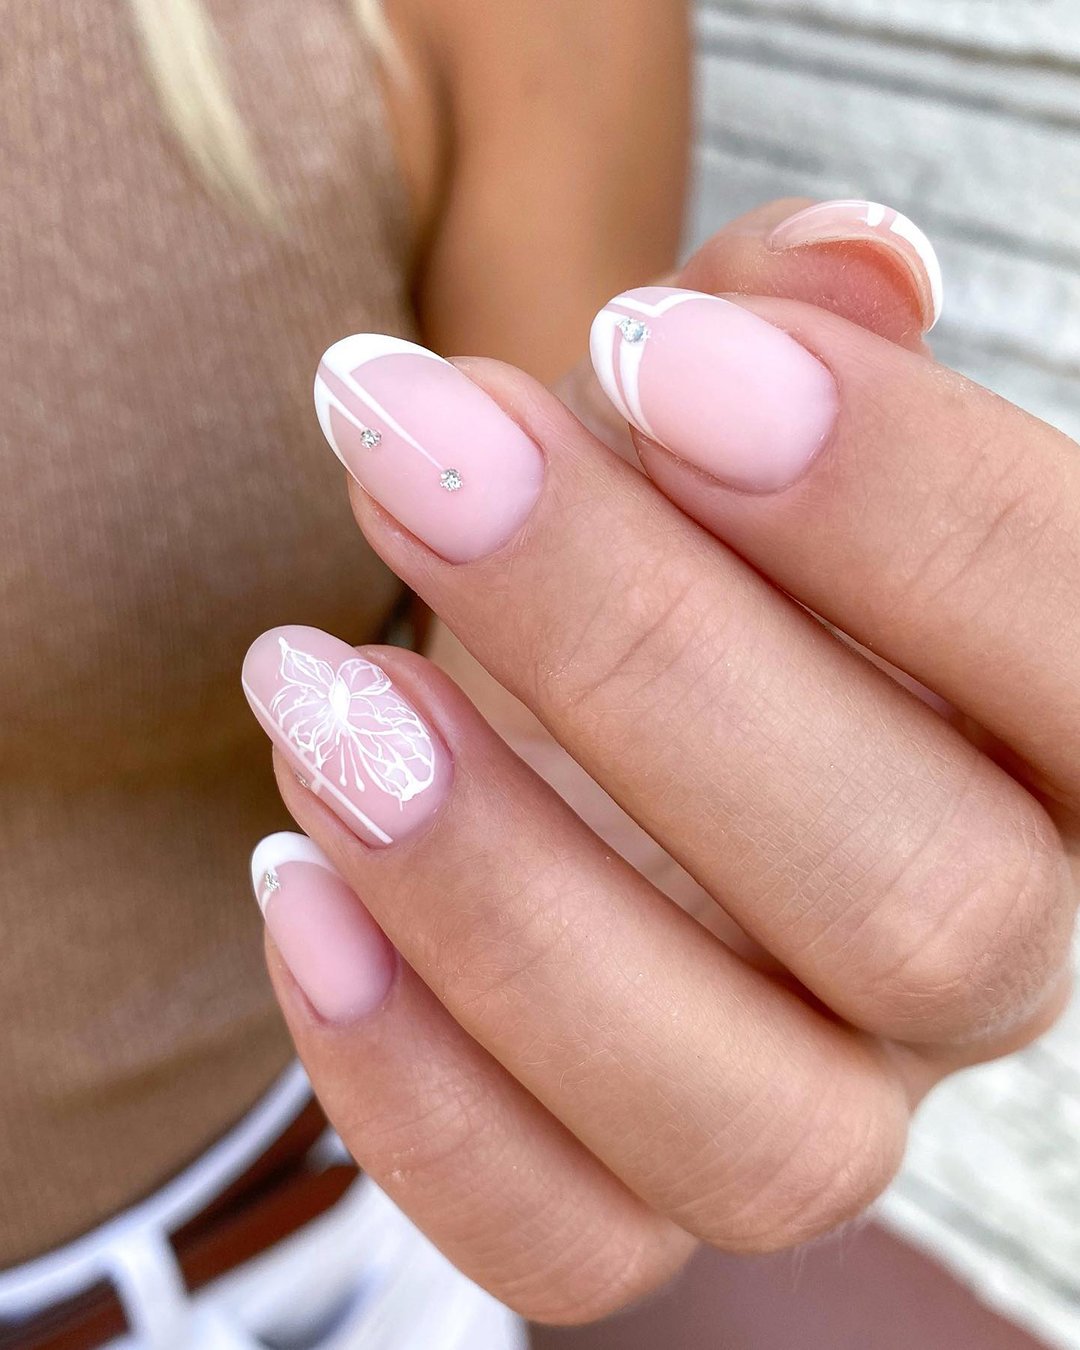 pink and white nails gentle french with petals painted juli.magic